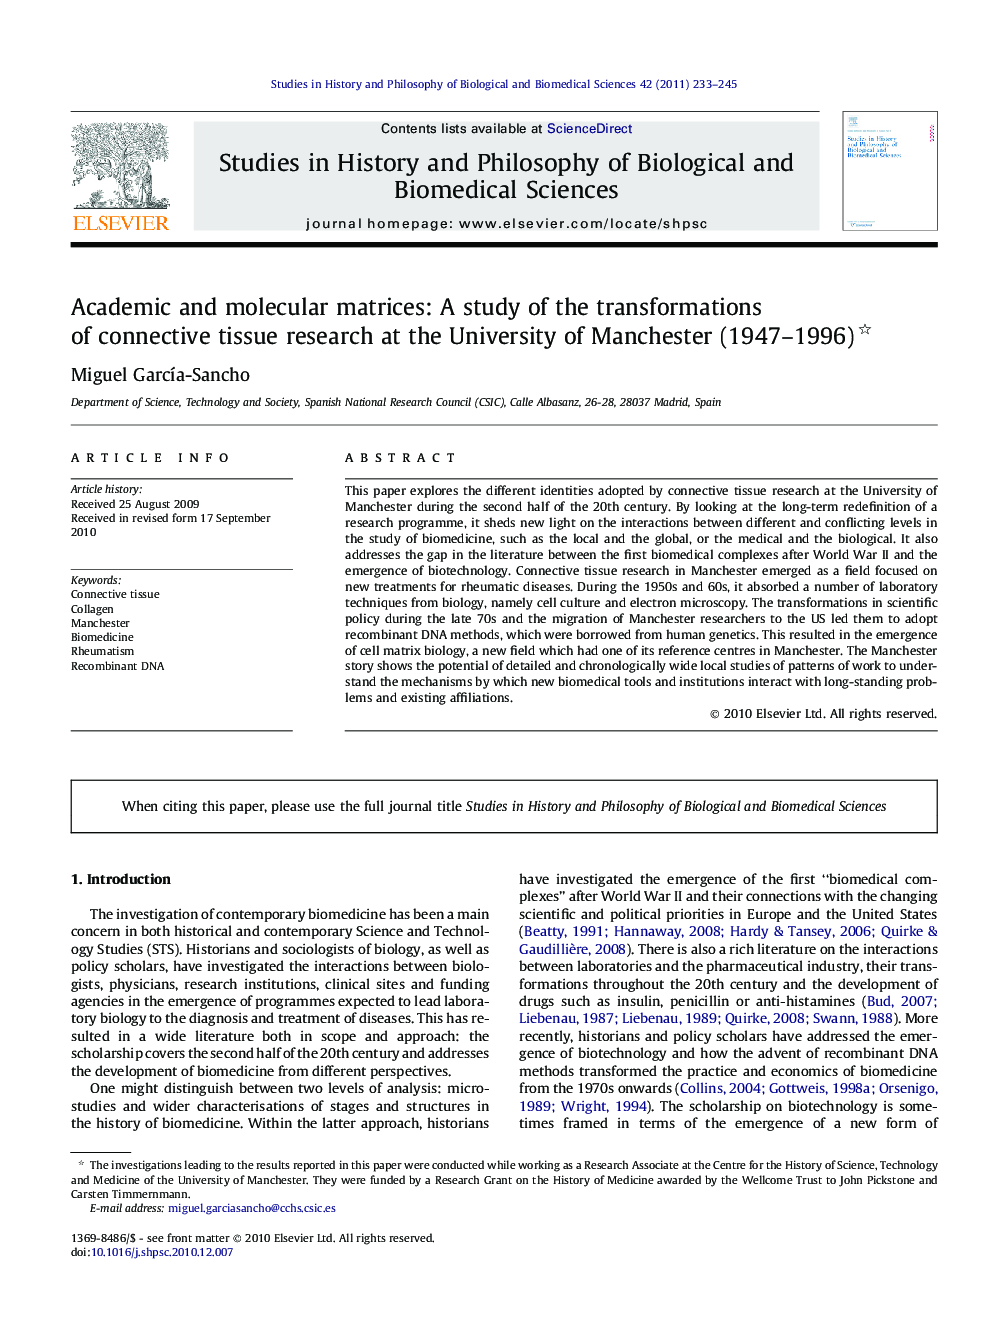 Academic and molecular matrices: A study of the transformations of connective tissue research at the University of Manchester (1947-1996)